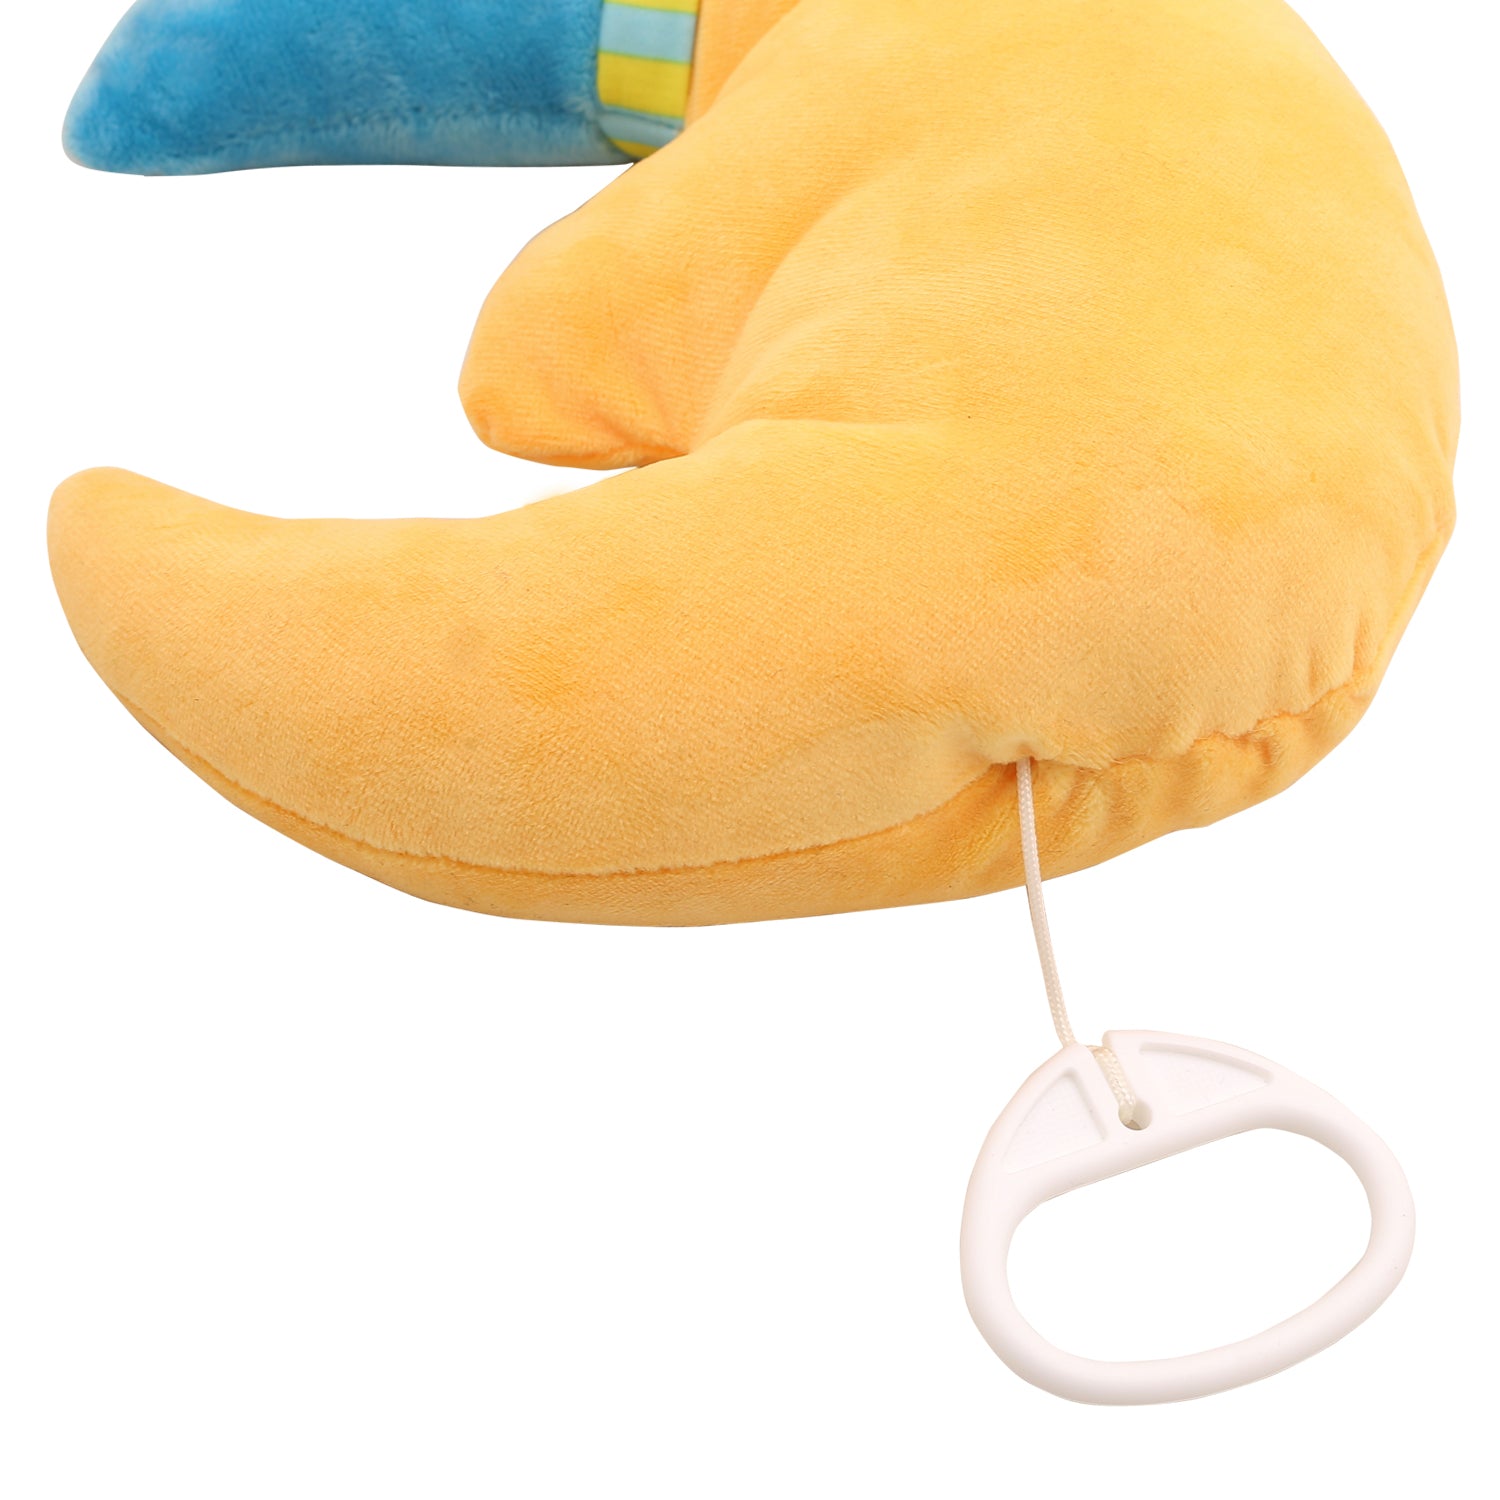 Moon Yellow Hanging Pulling Toy - Baby Moo